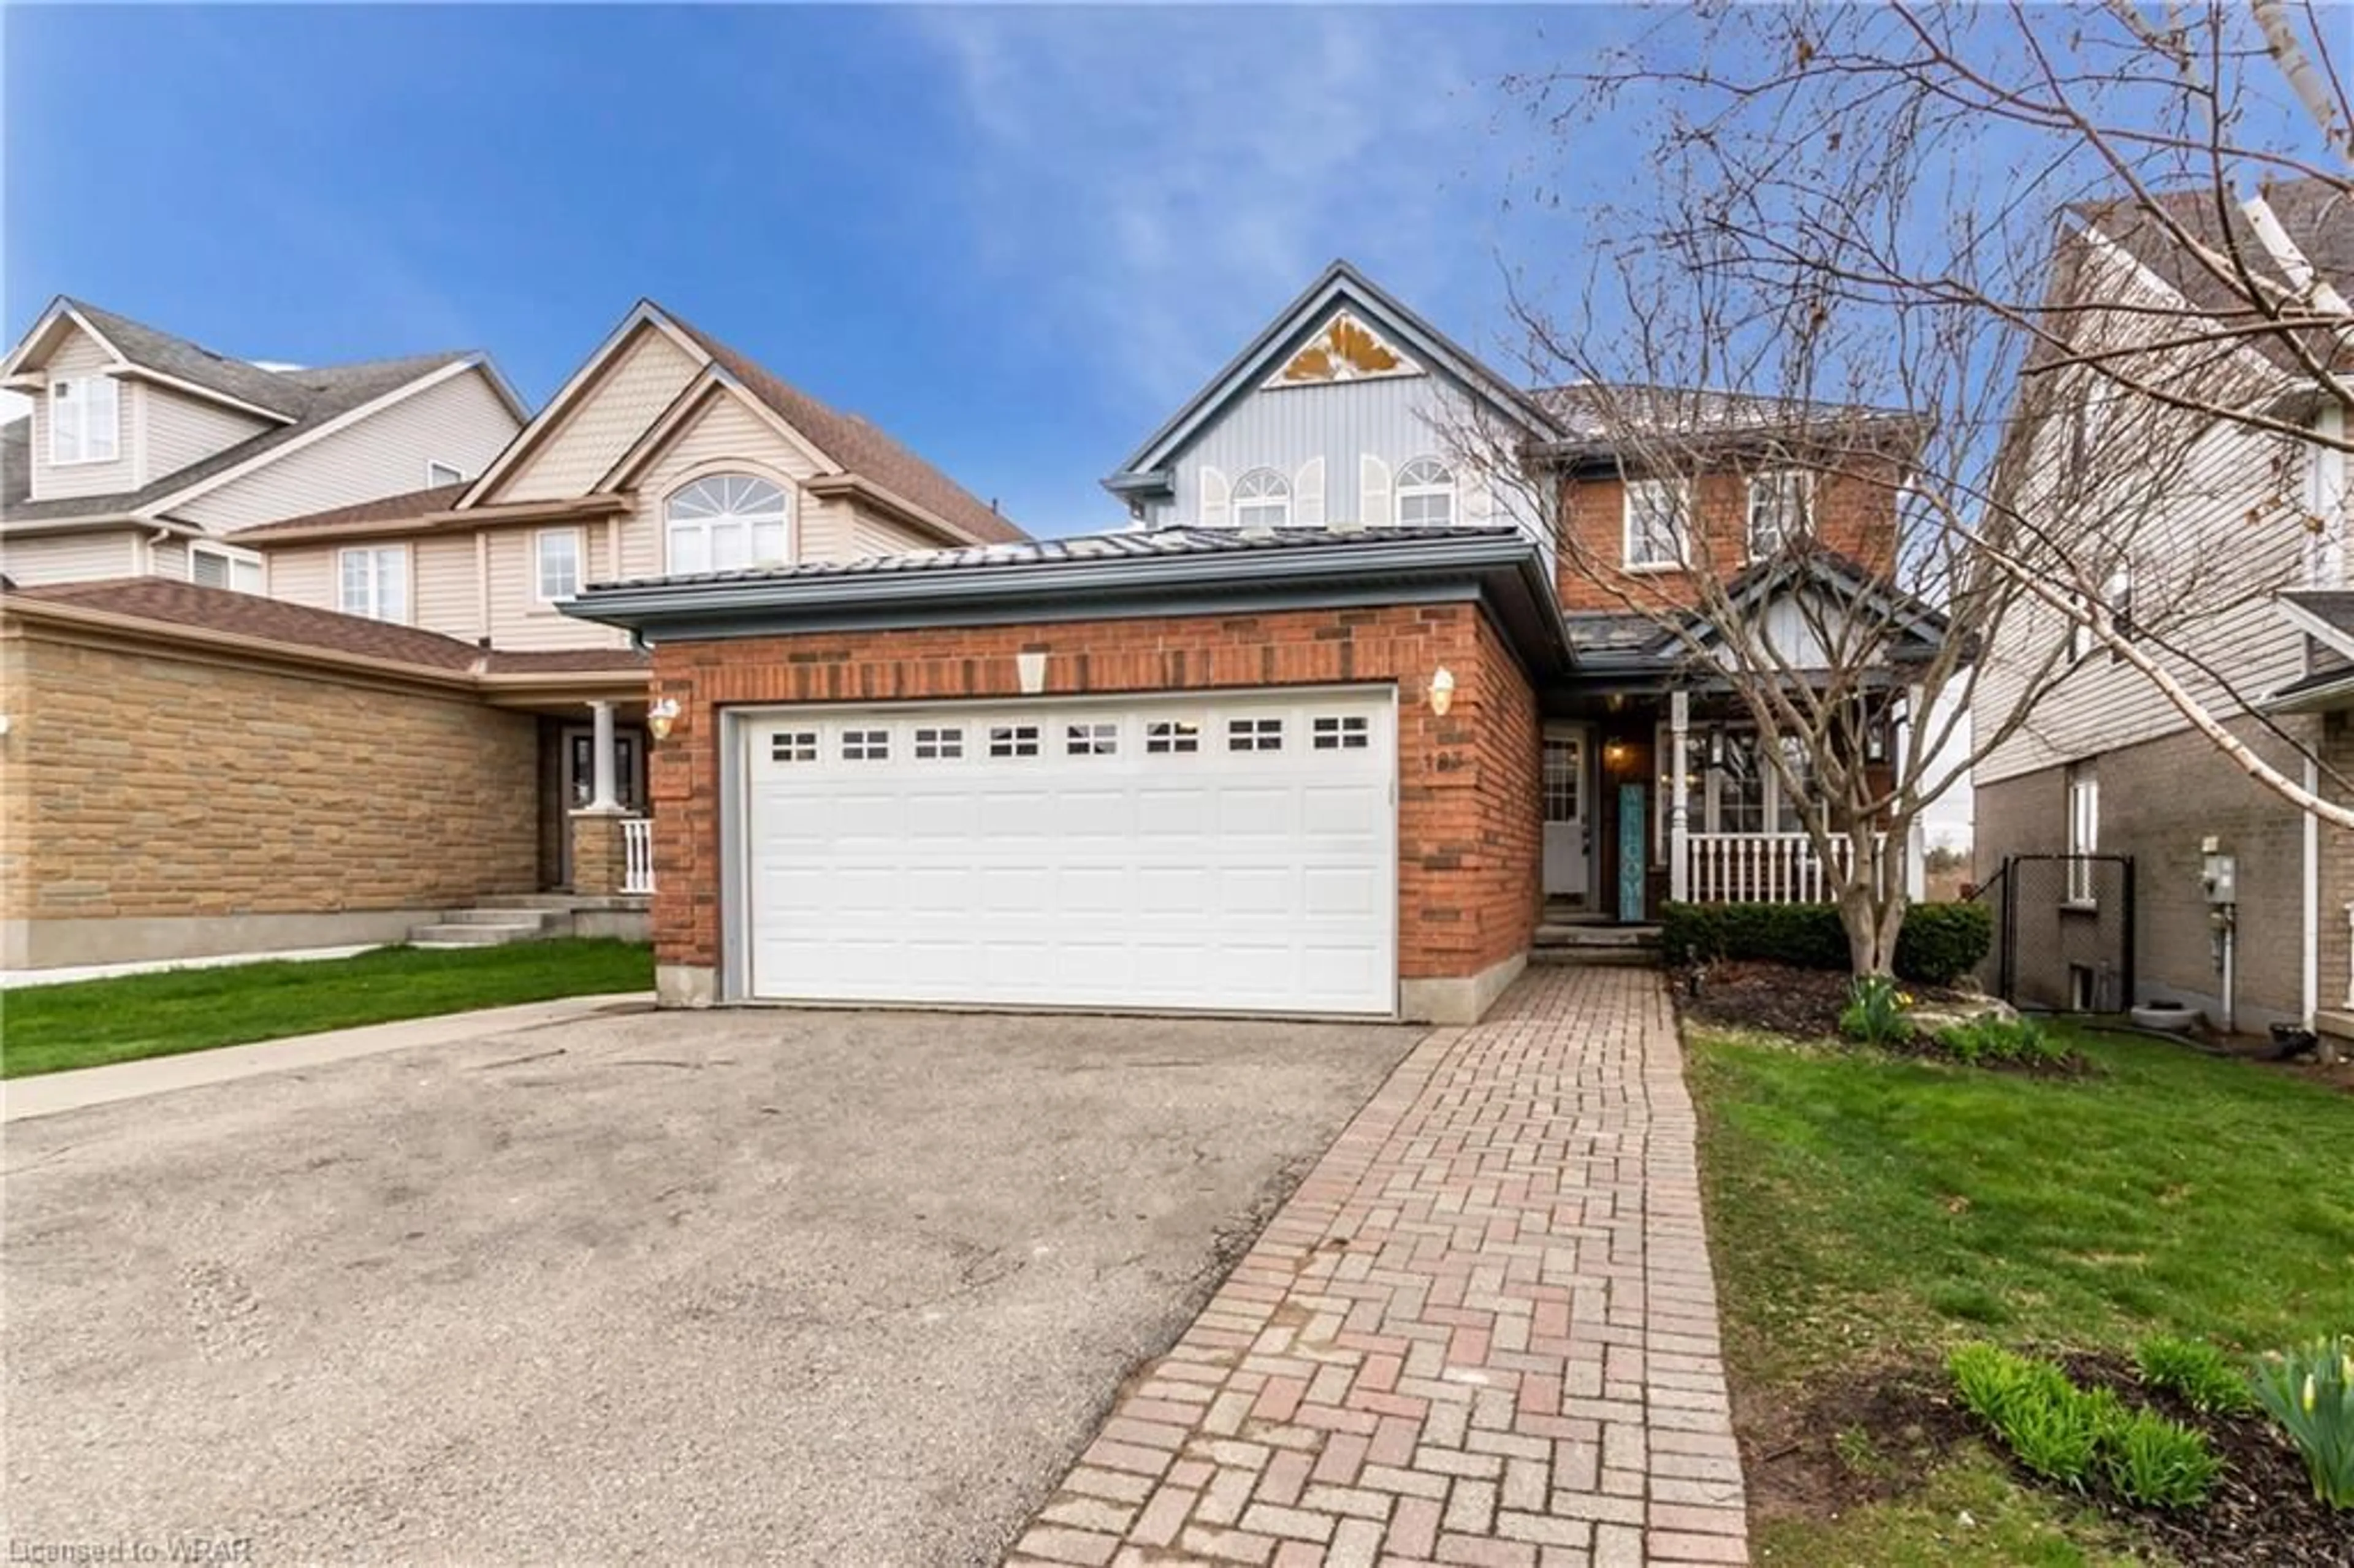 Home with brick exterior material for 183 Adler Dr, Cambridge Ontario N3C 4J5